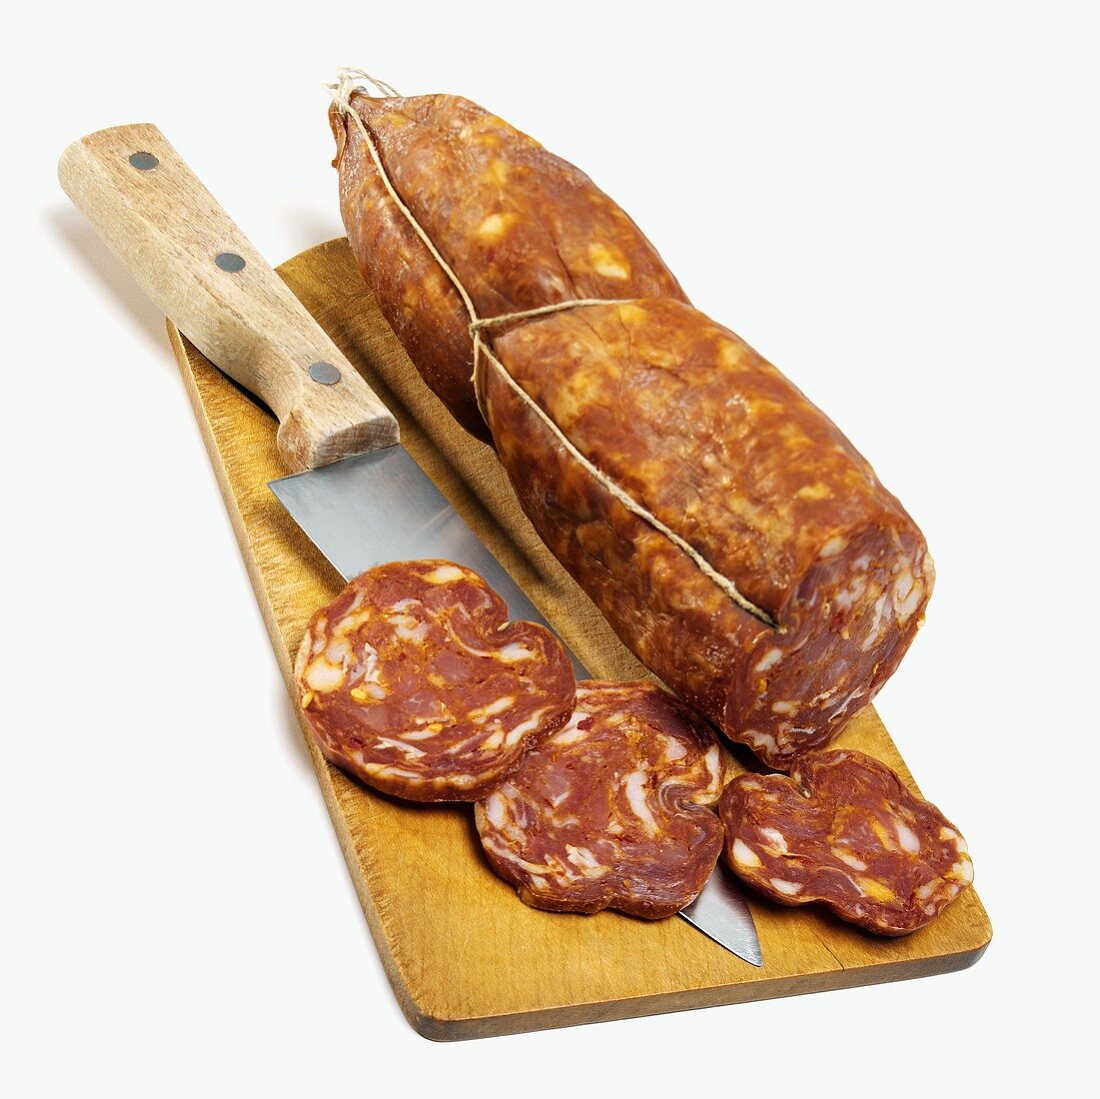 Sopressata with slices cut on chopping board